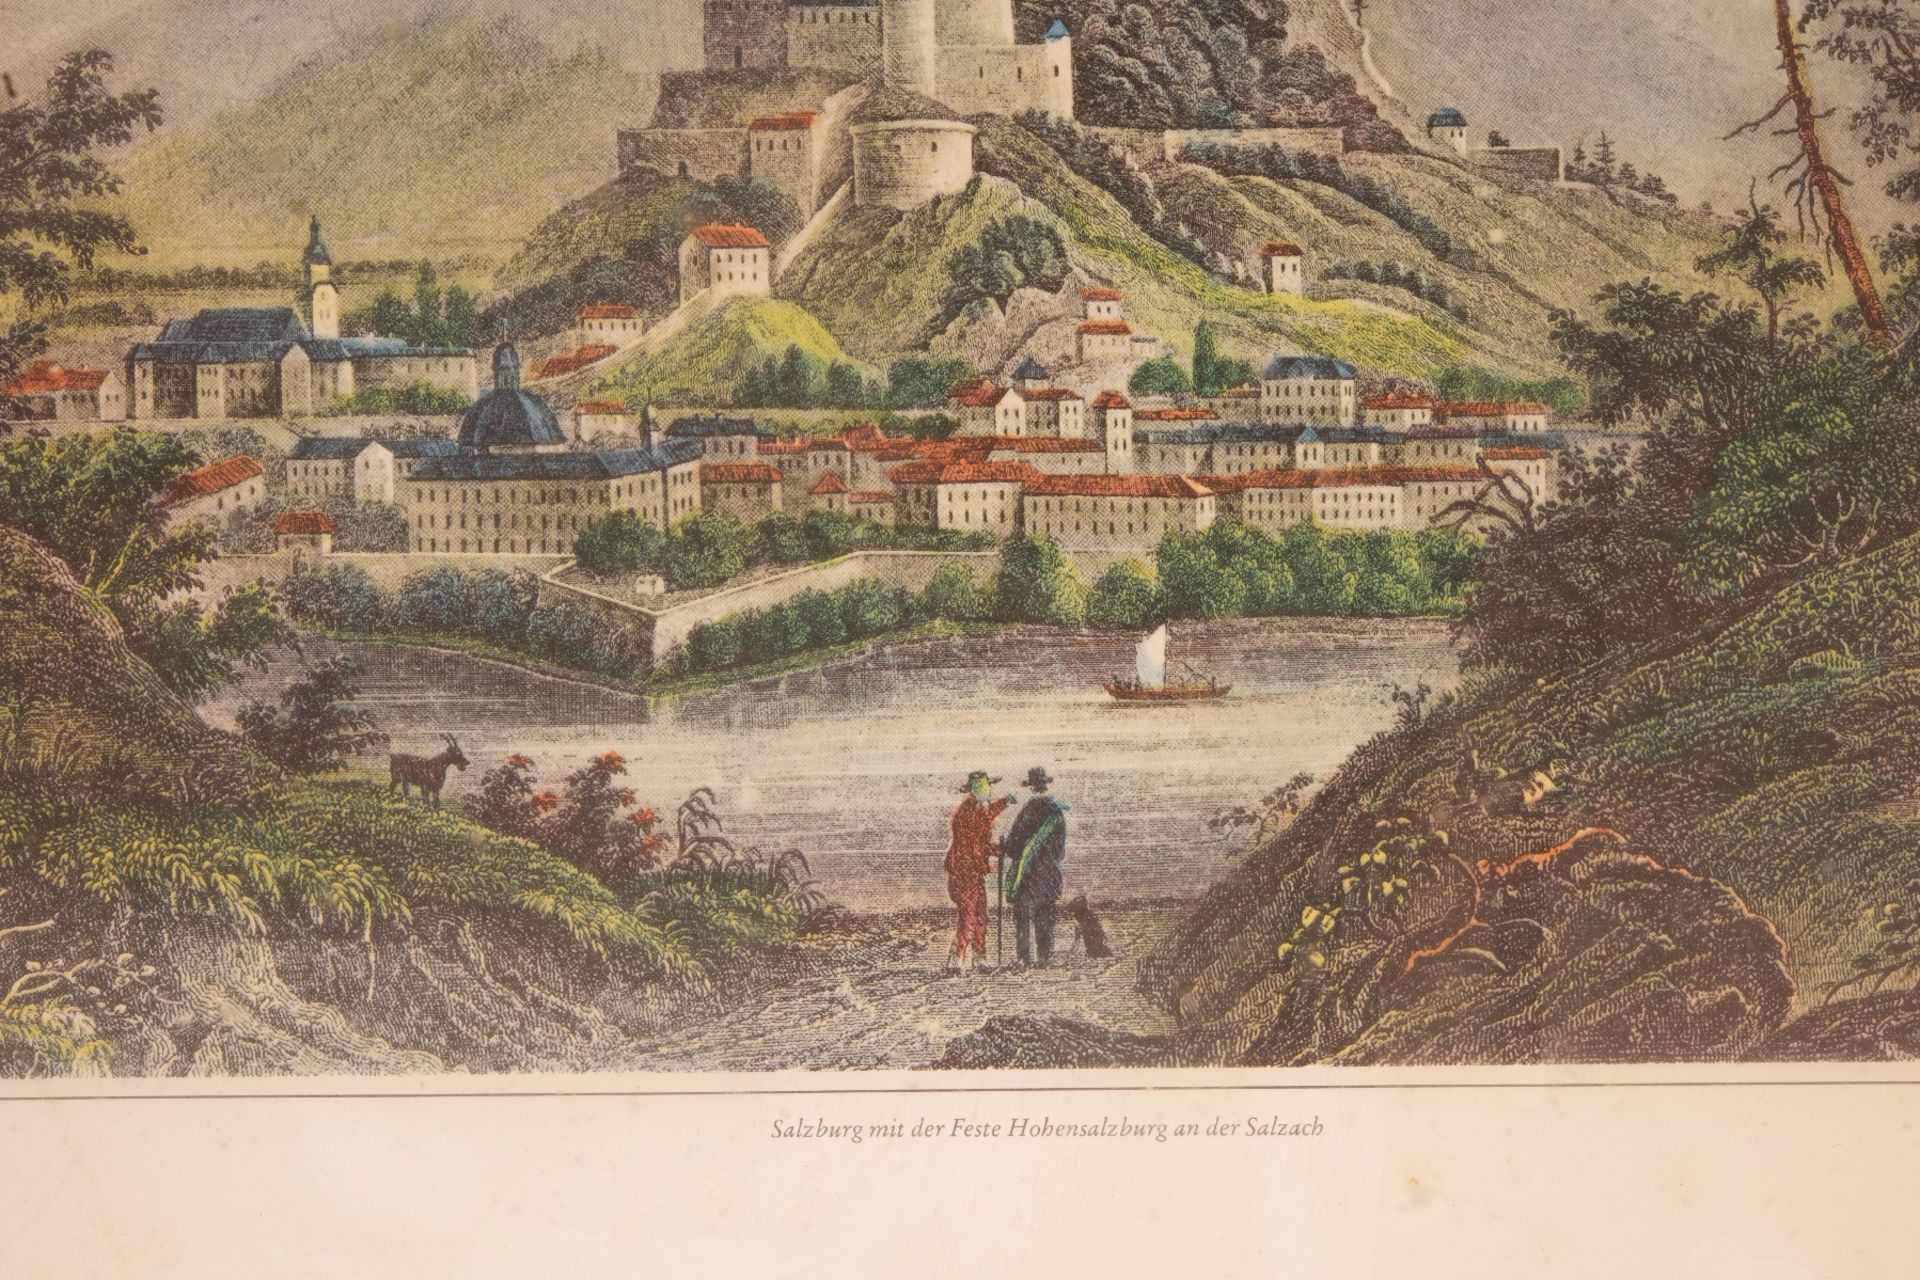 Artists of the 19th Century, Salzburg with Fortress Hohensalzburg on the Salzach River - Image 5 of 5